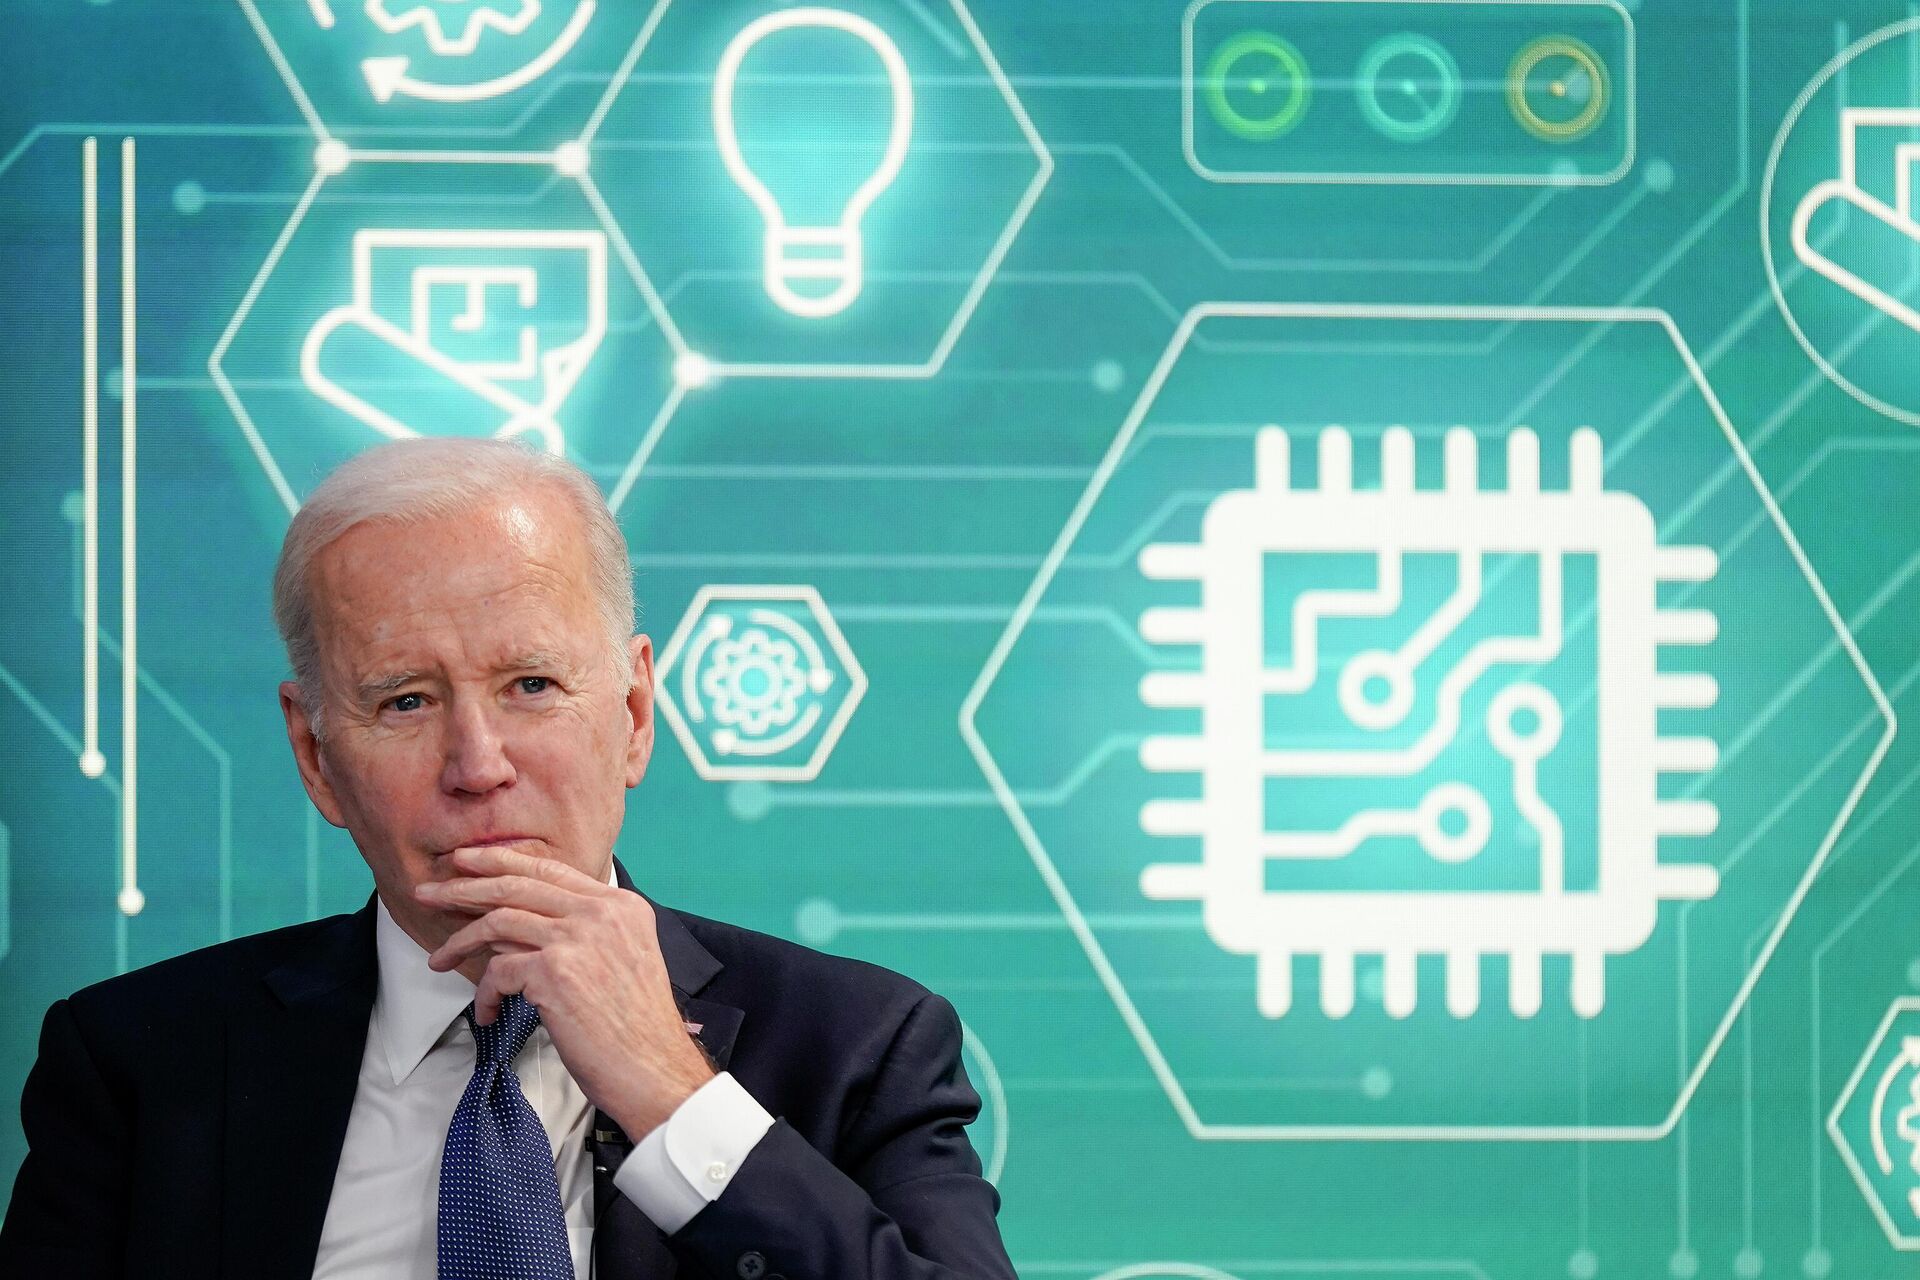 President Joe Biden attends an event to support legislation that would encourage domestic manufacturing and strengthen supply chains for computer chips in the South Court Auditorium on the White House campus, March 9, 2022, in Washington. Just hours before Senate Republican leader Mitch McConnell threatened to block a bill to revive the U.S. computer chip sector, senior Biden aides met on a Thursday morning to plan for that exact scenario. They decided to keep pushing and working bipartisan relationships with legislators developed over 18 months, leading to the passage of the $280 billion CHIPS and Science Act. - Sputnik International, 1920, 01.09.2022